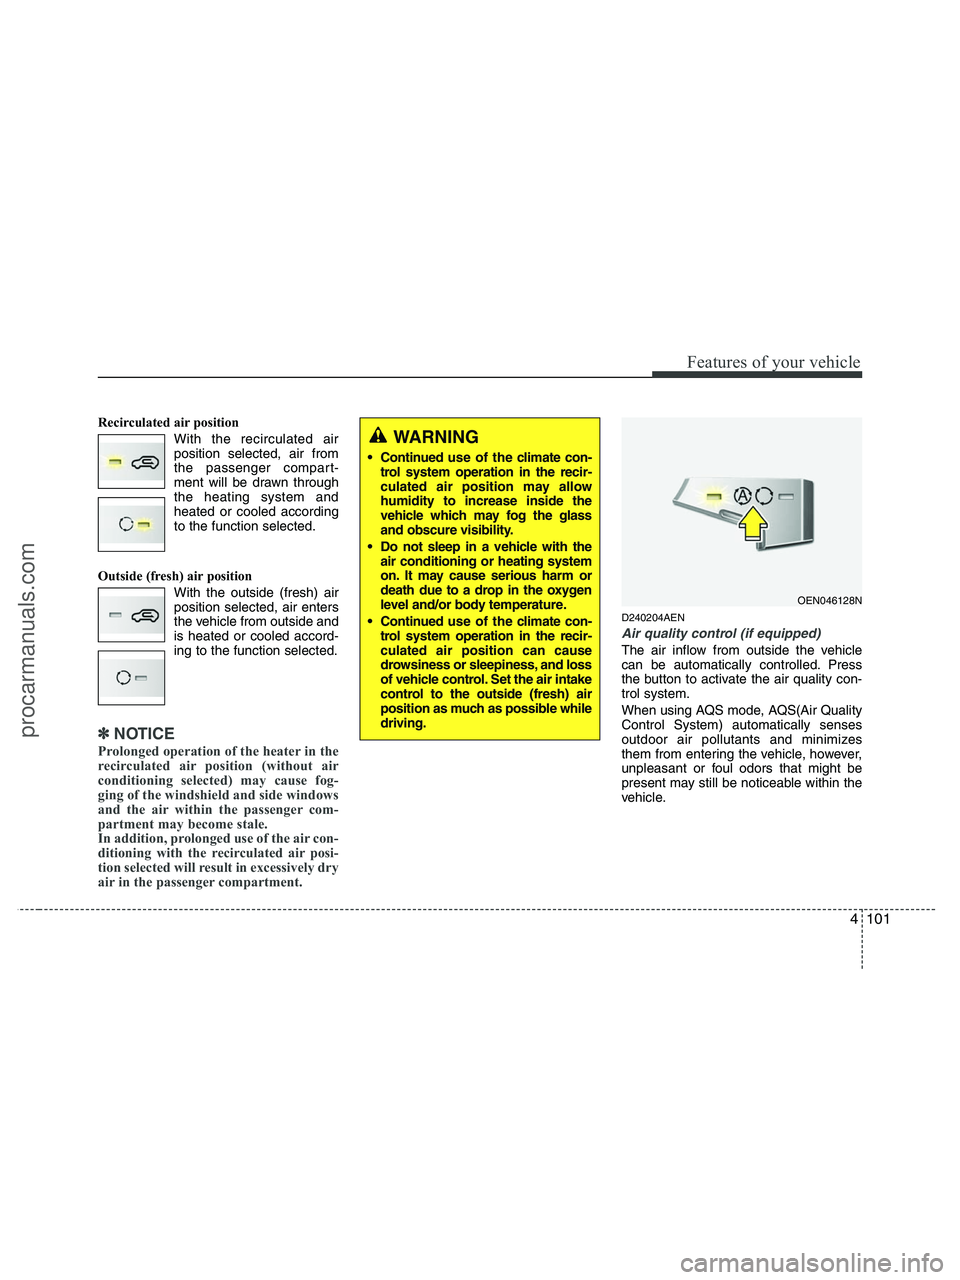 HYUNDAI VERACRUZ 2010  Owners Manual 4101
Features of your vehicle
Recirculated air position
With the recirculated air
position selected, air from
the passenger compart-
ment will be drawn through
the heating system and
heated or cooled 